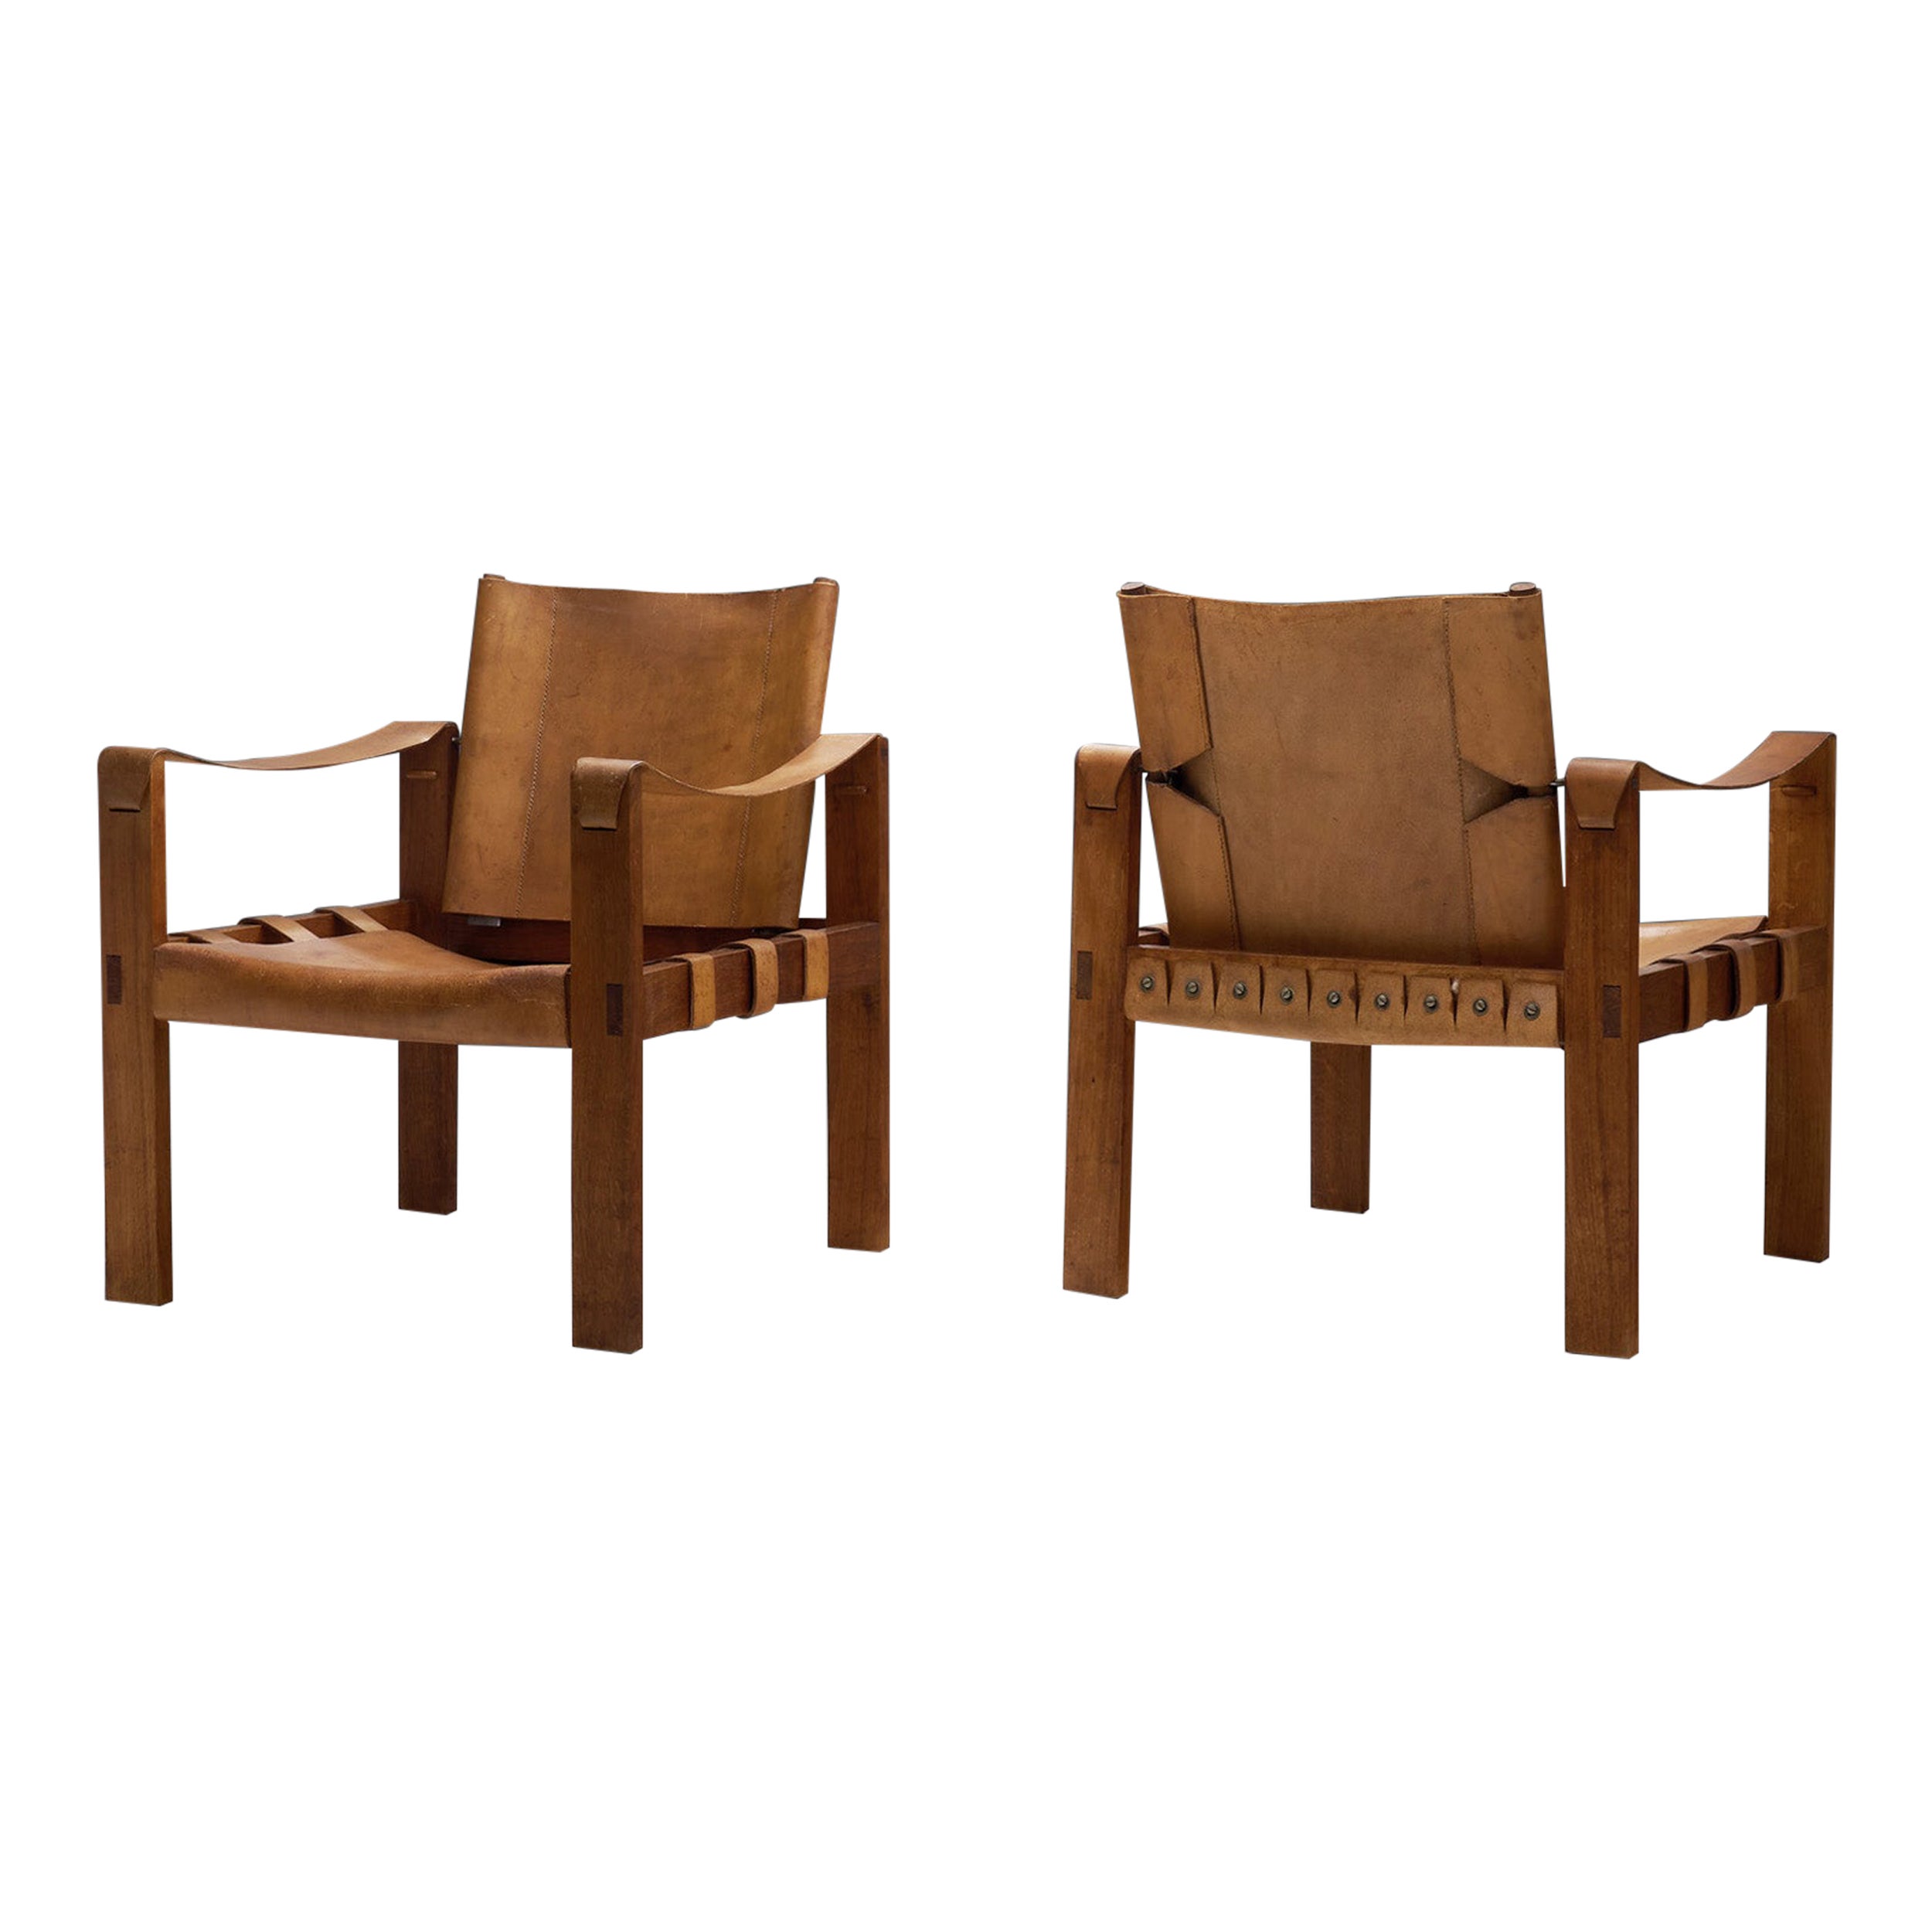 "Safari" Chairs in Patinated Cognac Leather, Europe ca 1960s